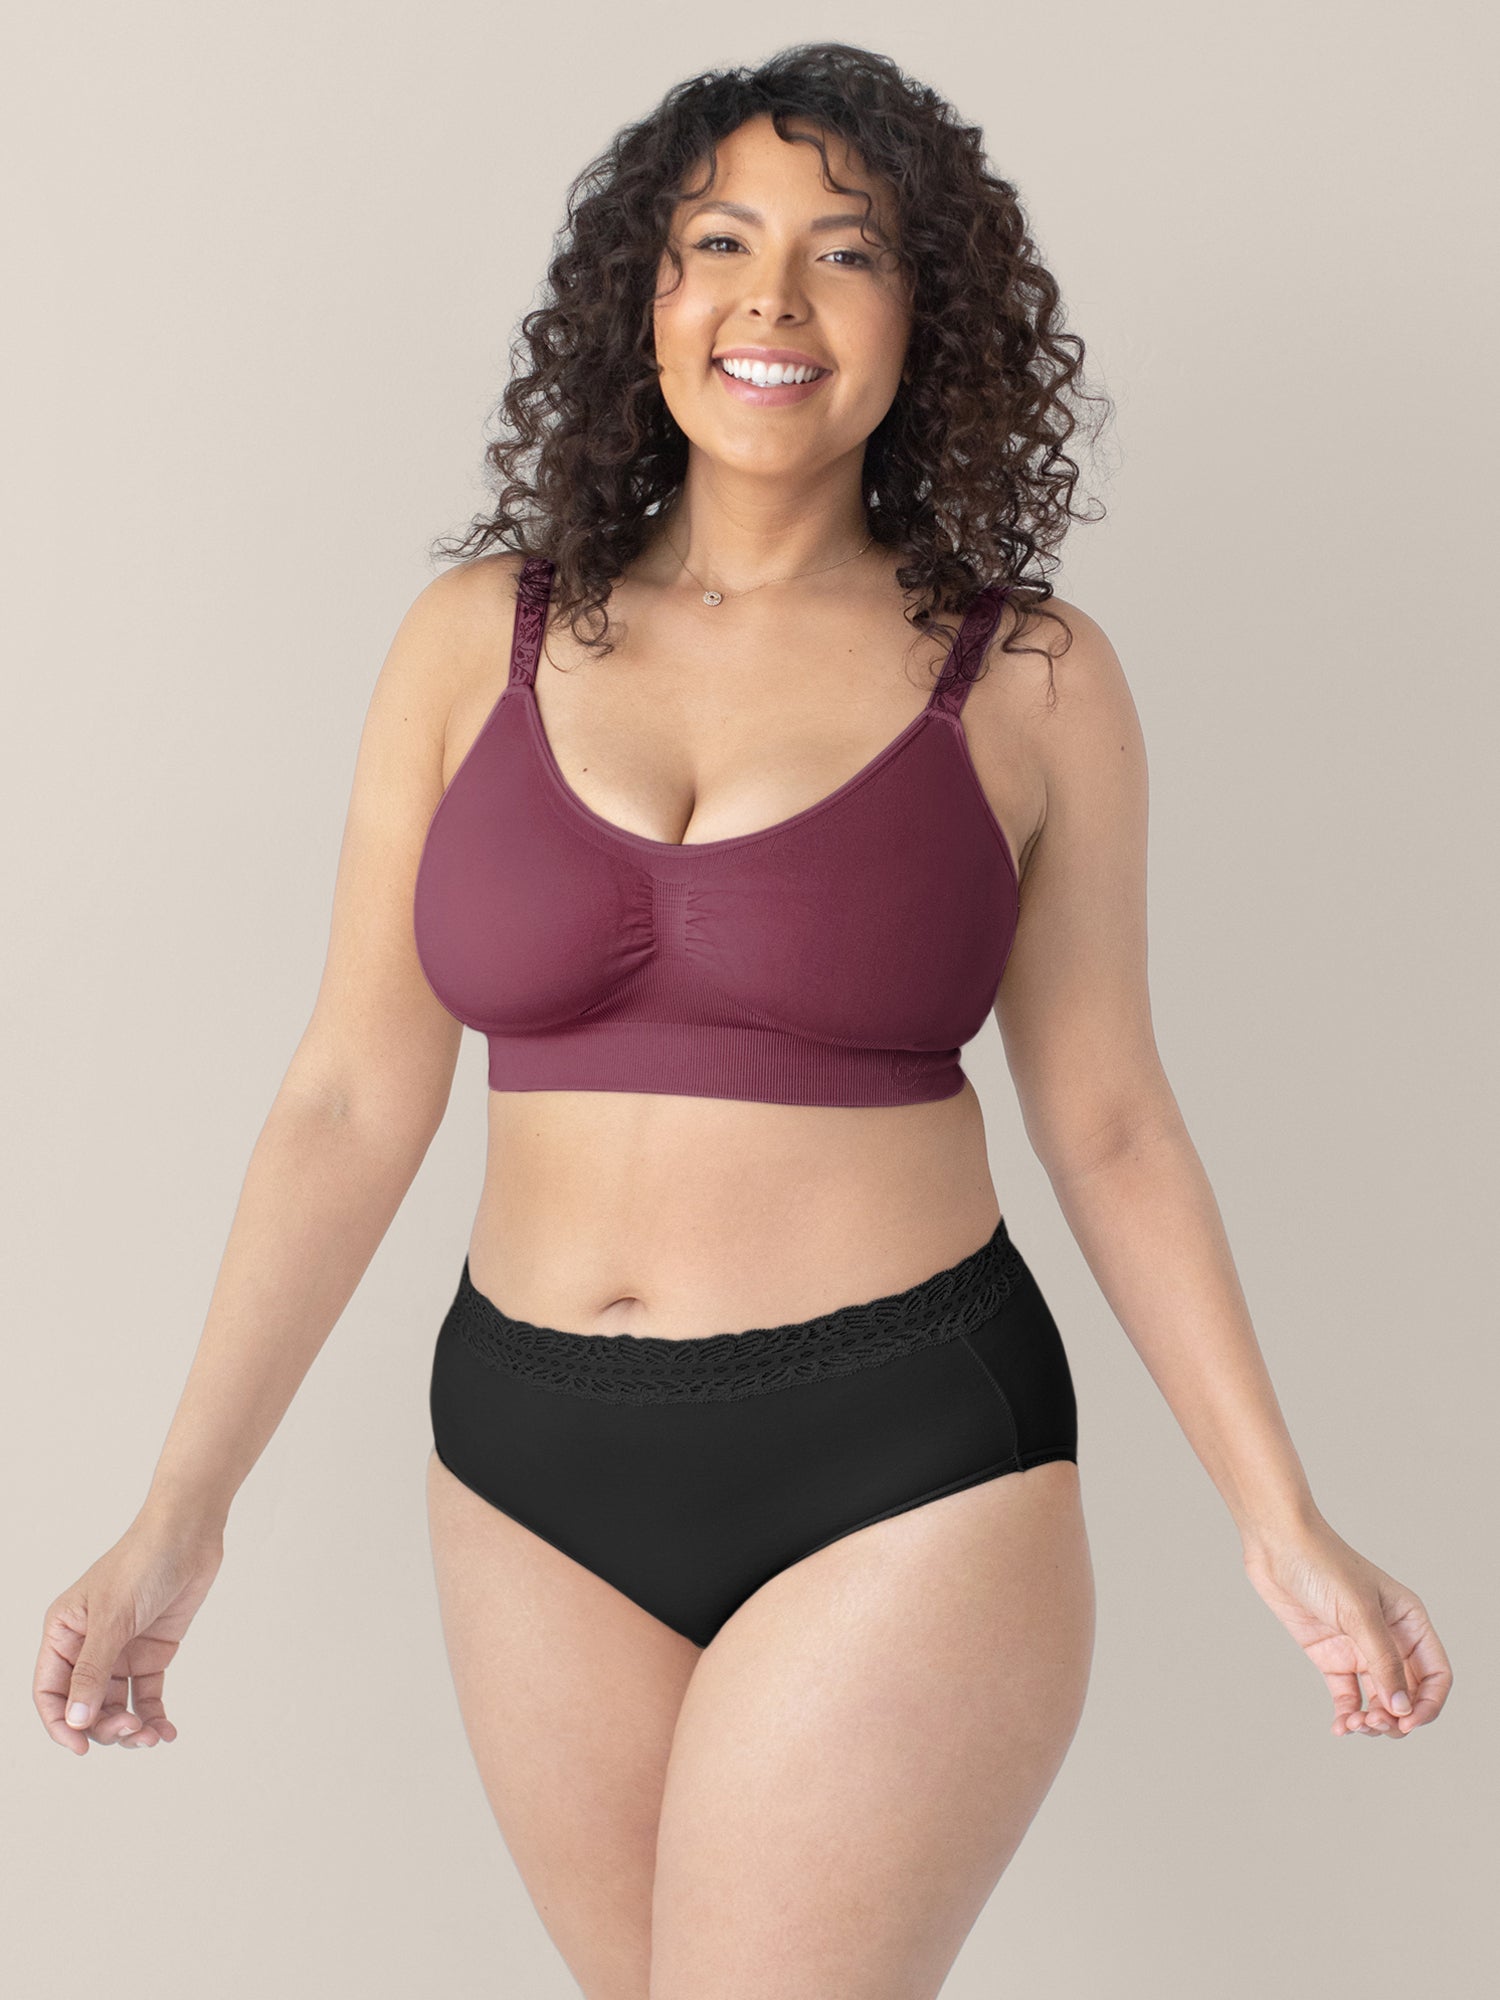 Handful Bra: Base Layer Review